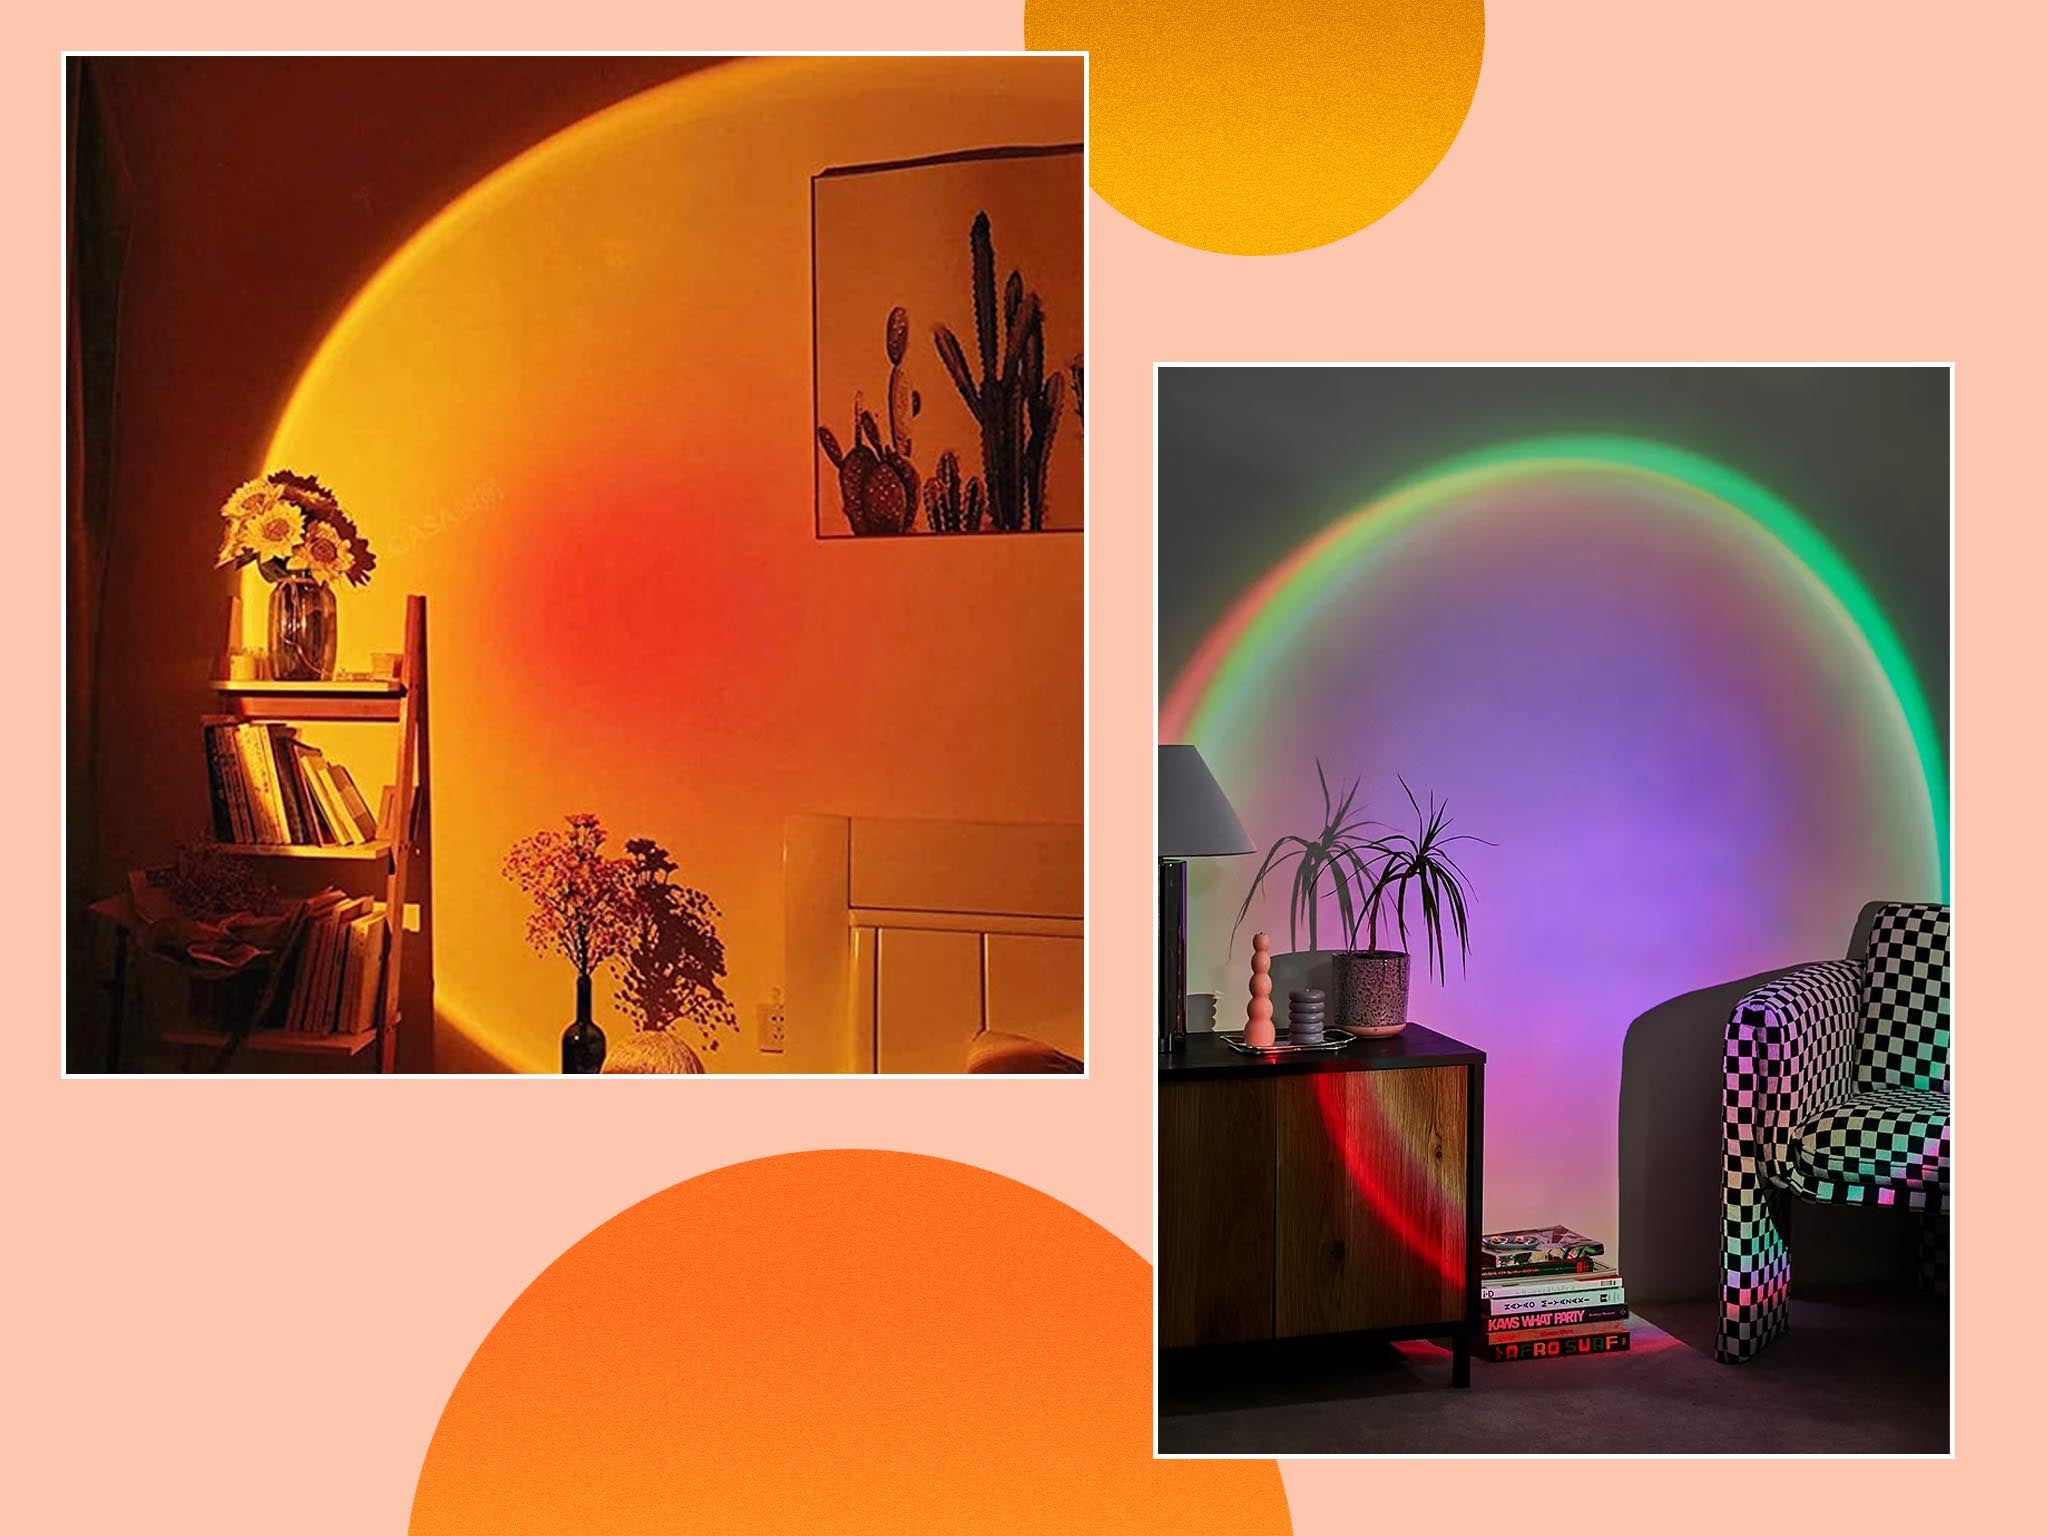 Shop sunset lamps at Amazon and Urban Outfitters from £11.99